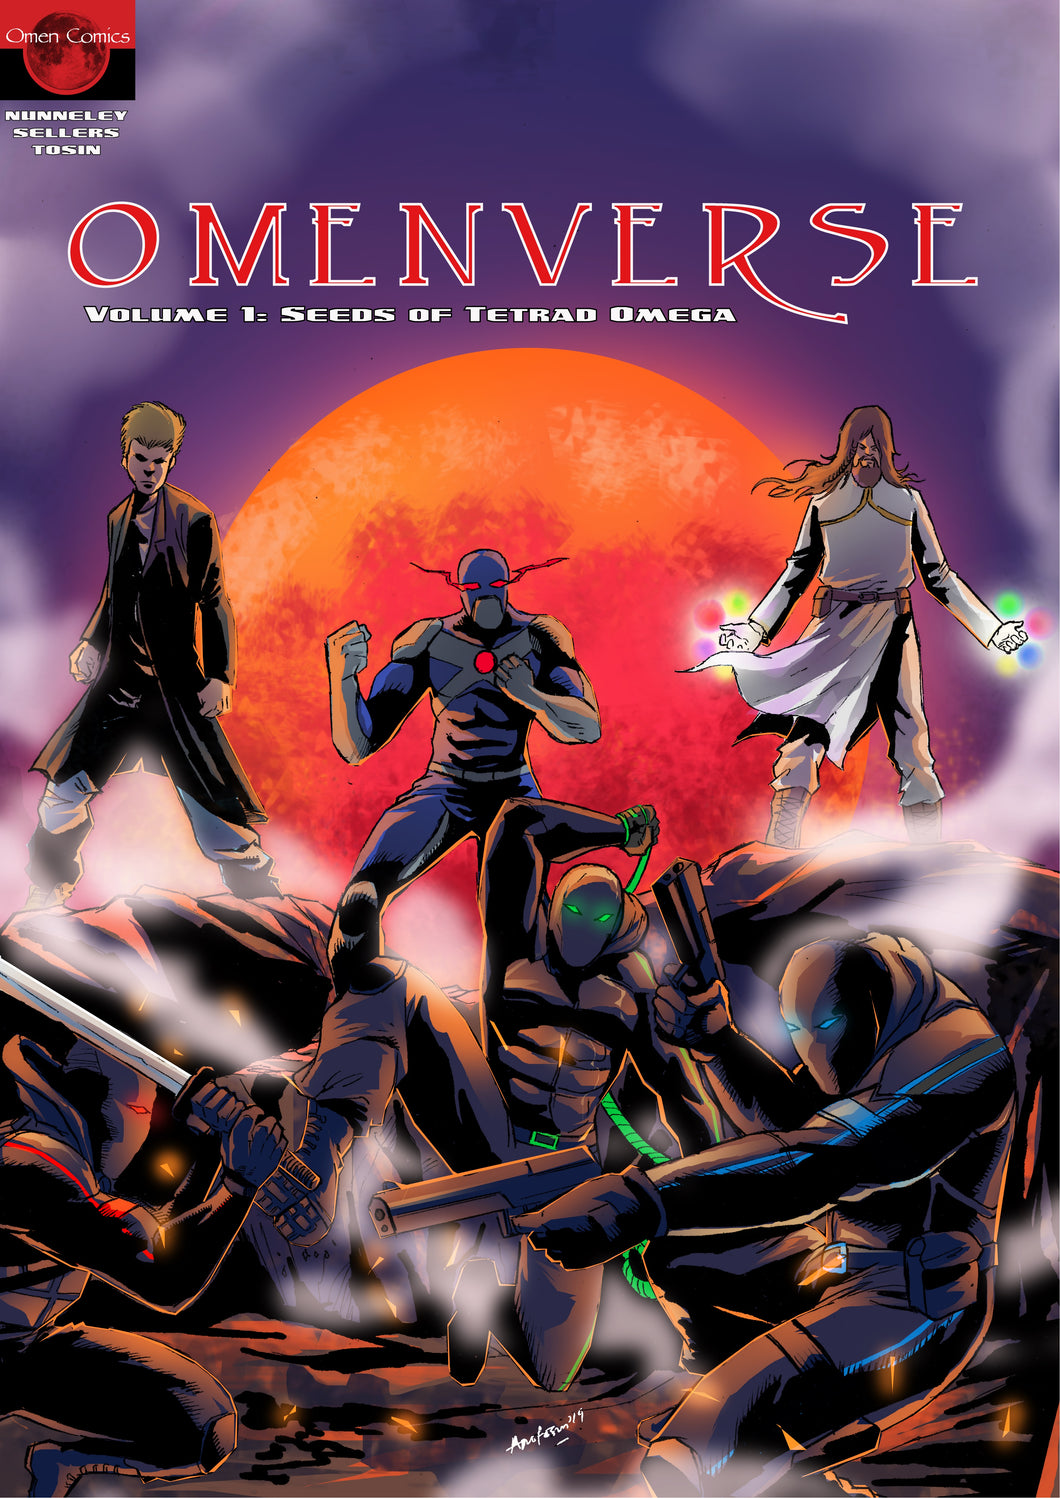 DIGITAL DOWNLOAD - The Omenverse Volume One: Seeds of Tetrad Omega